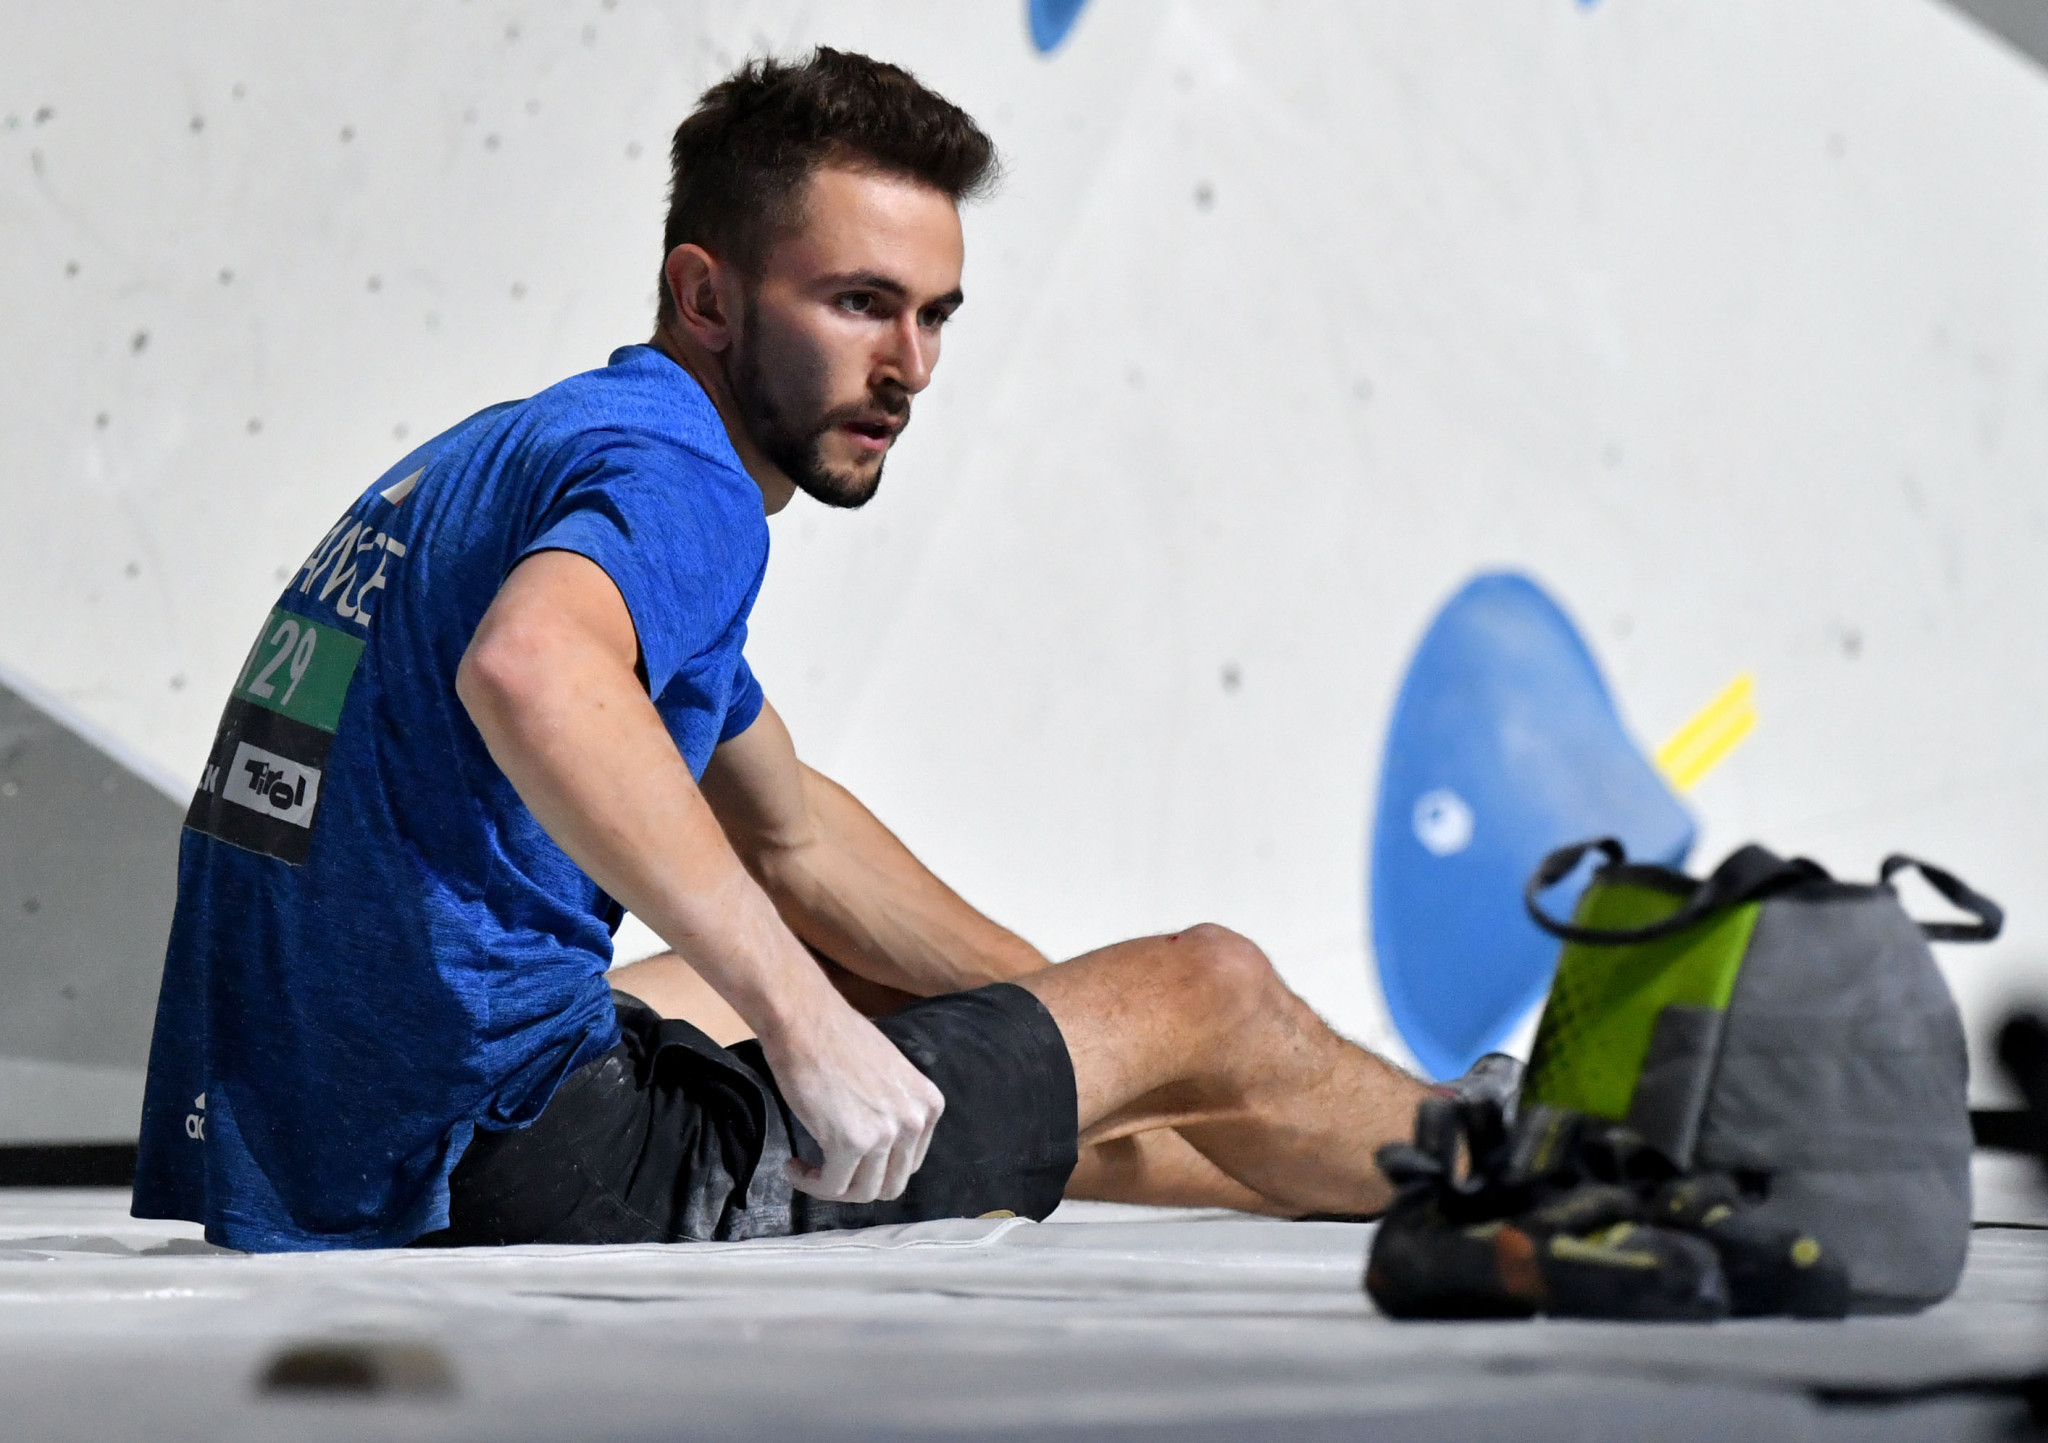 France's Manuel Cornu took his first title of the season at the IFSC World Cup in Chongqing ©Getty Images